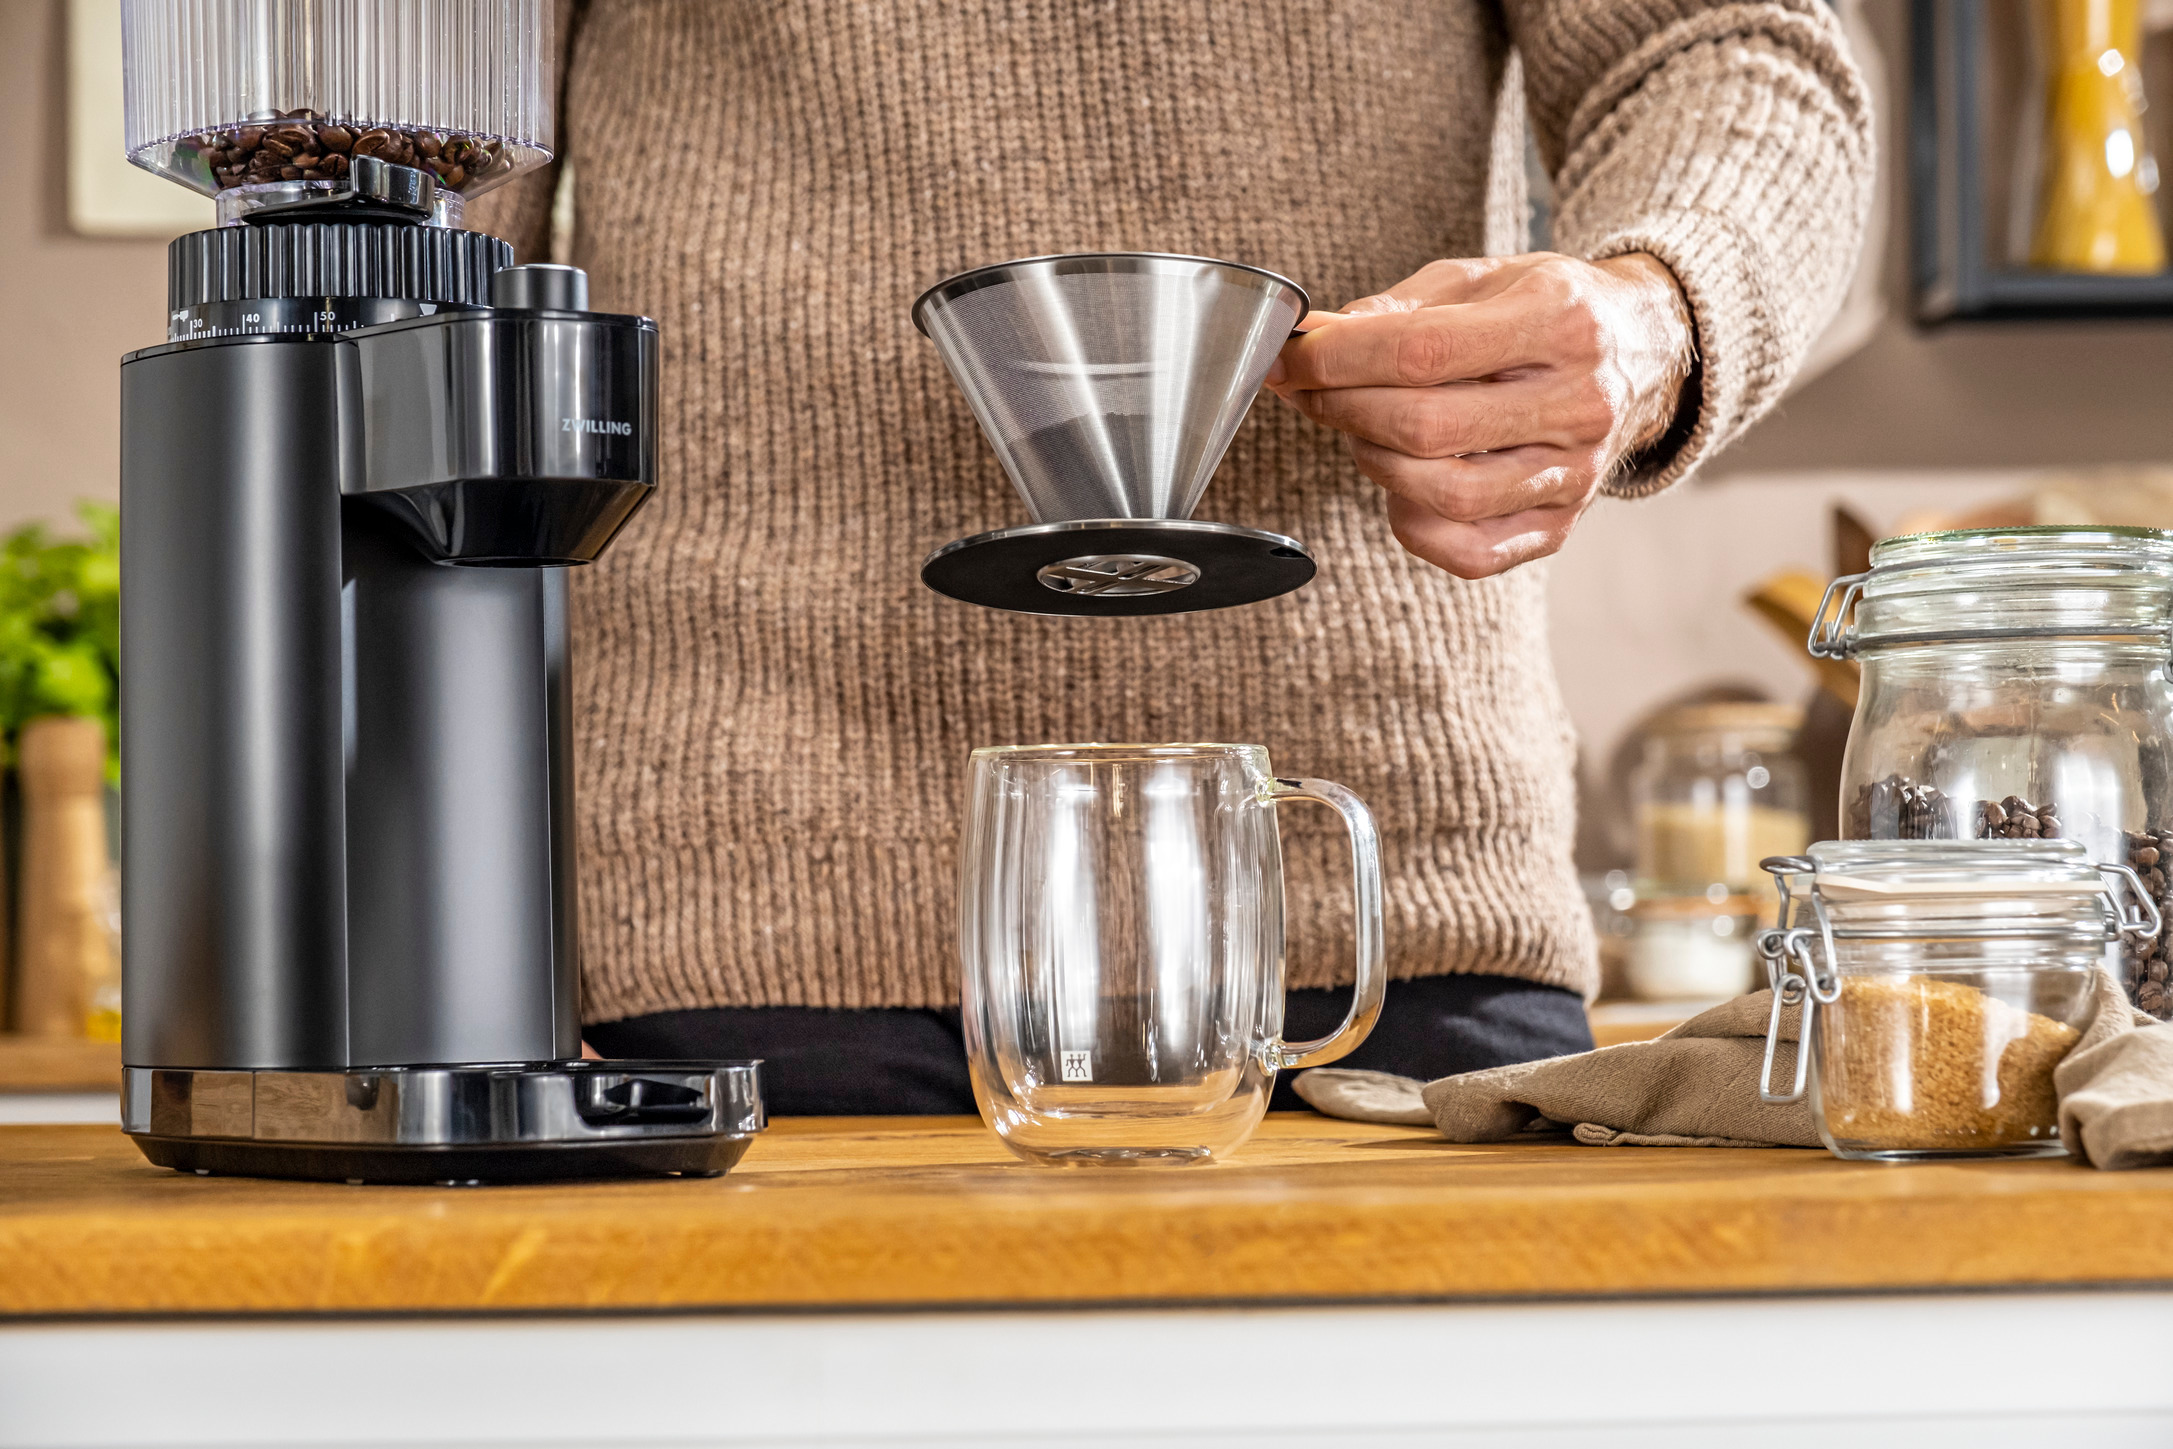 https://3fa-media.com/zwilling/zwilling-zwilling-dripper-for-coffee__138279_6f30575-s2500x2500.jpg